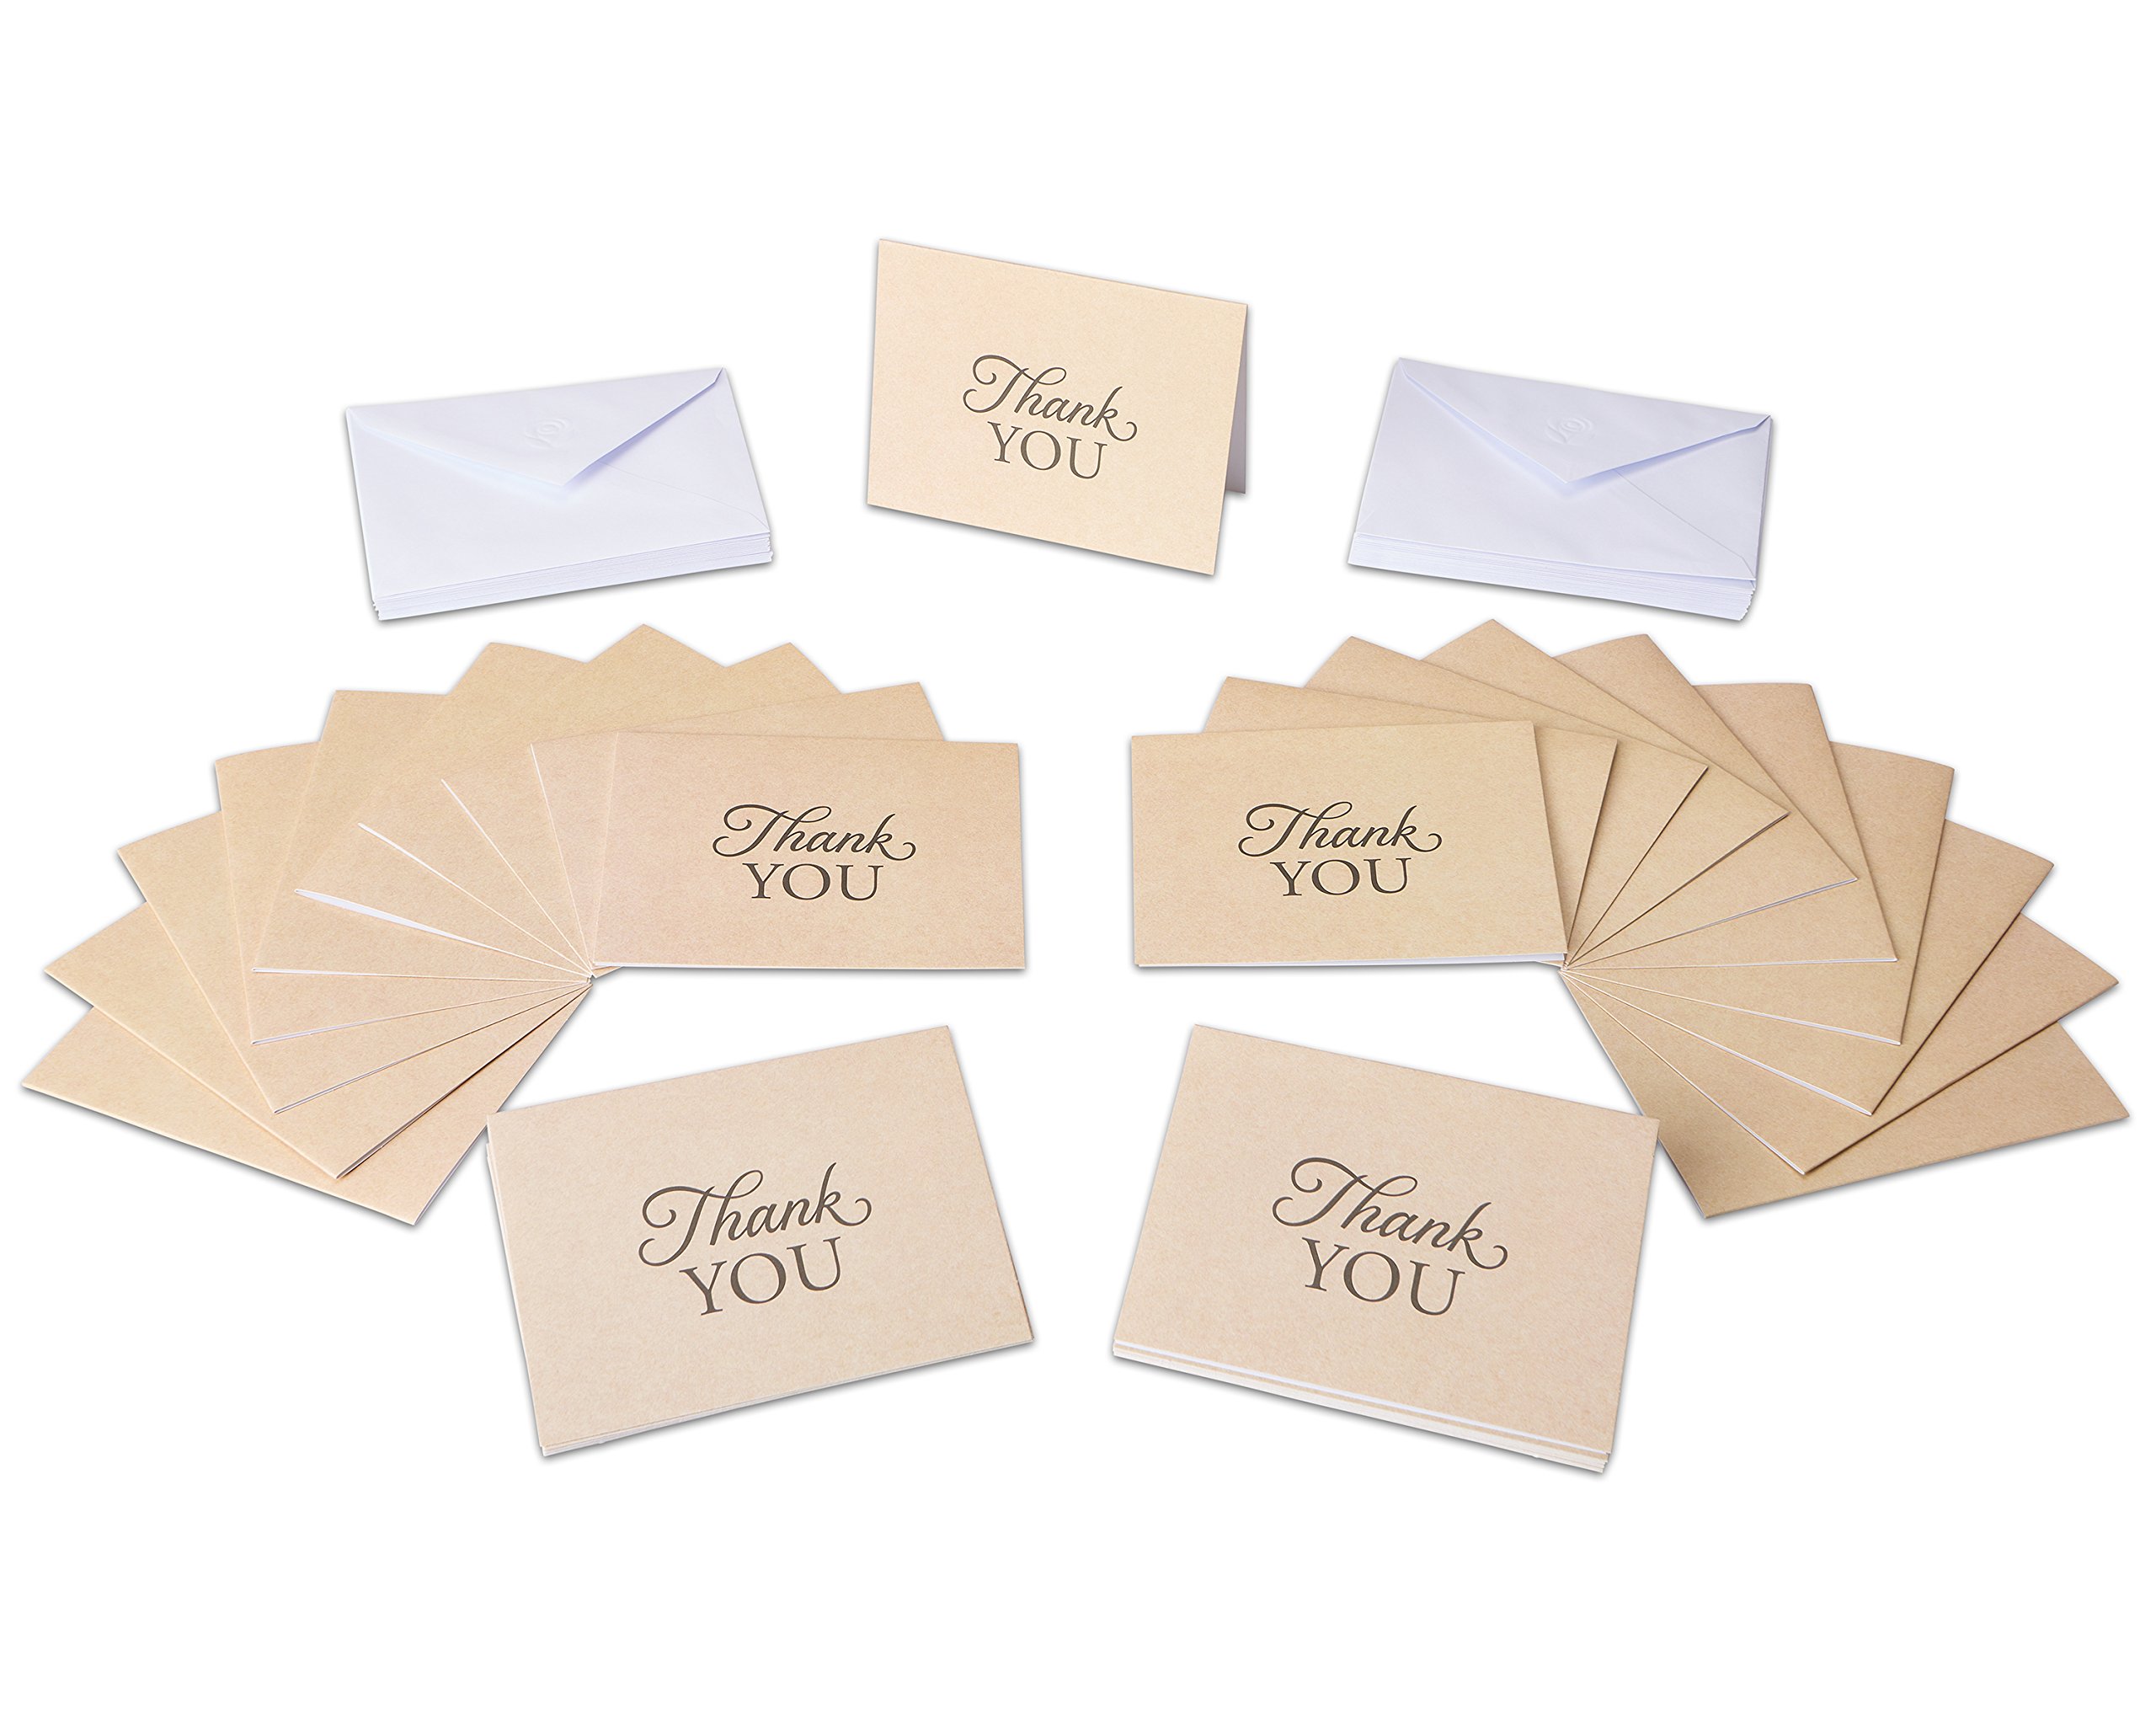 American Greetings Thank You Cards with Envelopes, Brown Kraft-Style (50-Count)